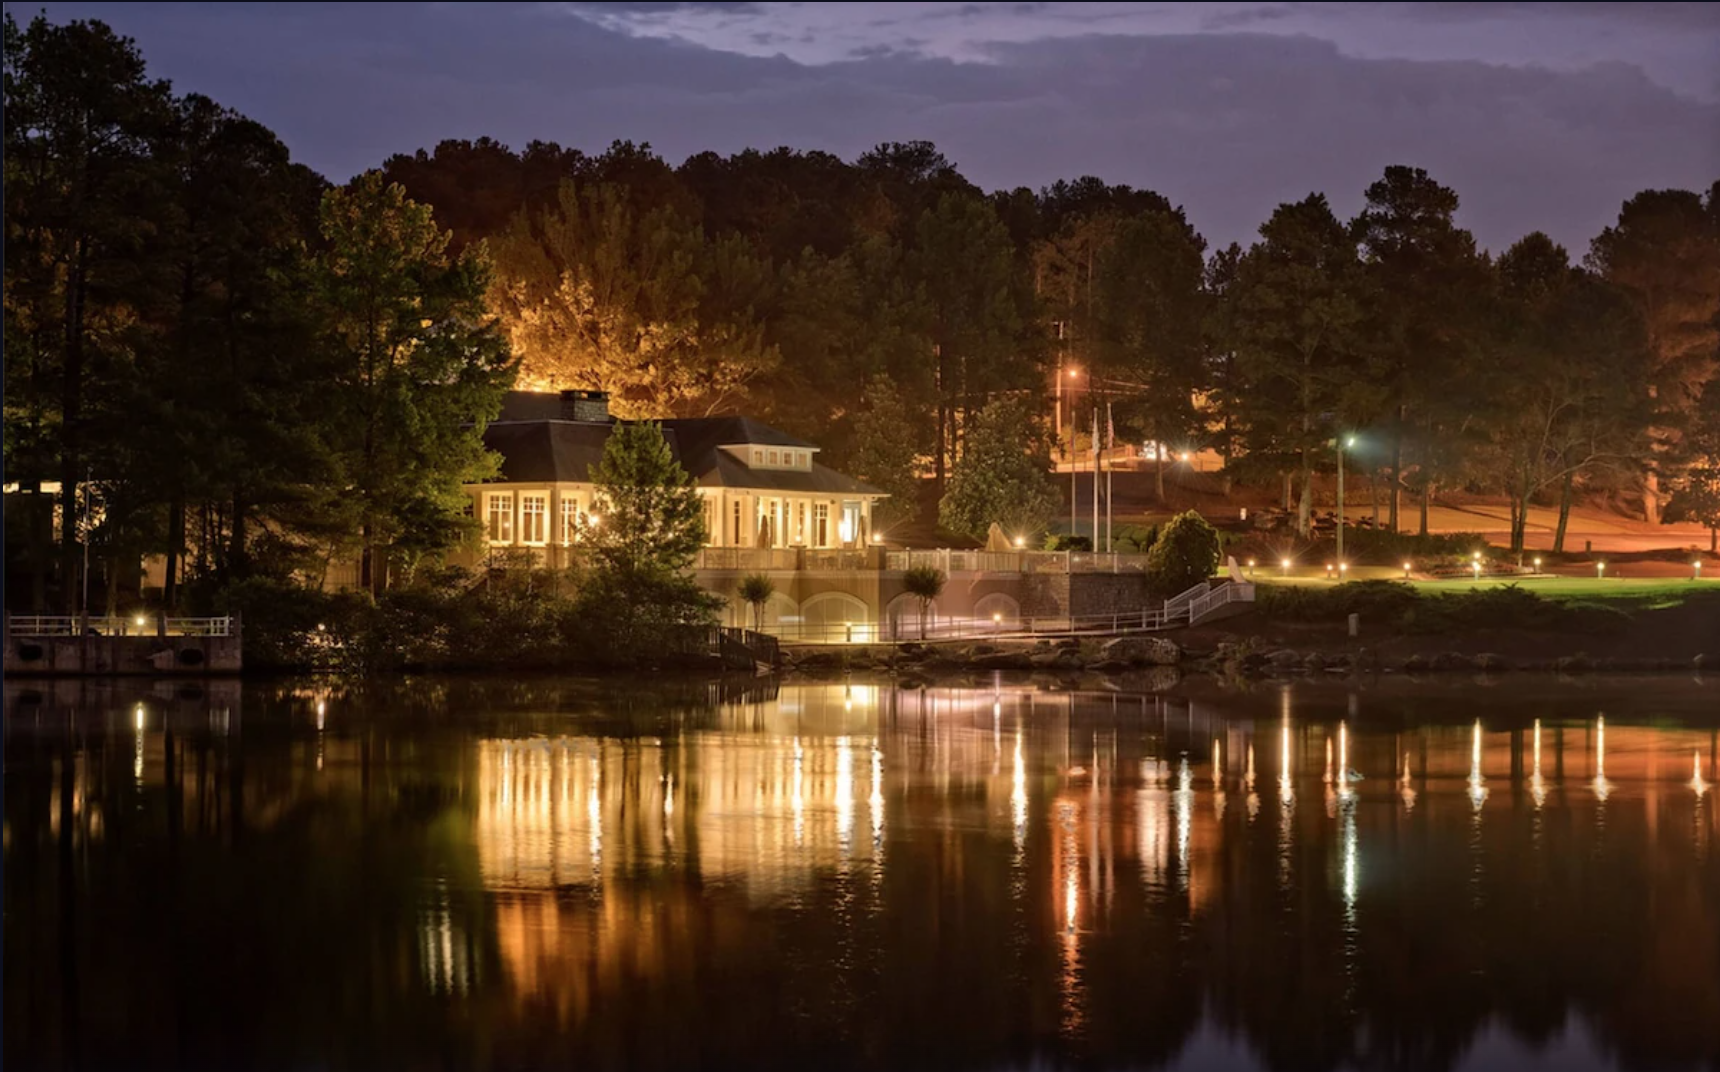 an evening image off the water of a beautiful building illuminated by bright lights and path to the water, one of the resorts in Georgia!